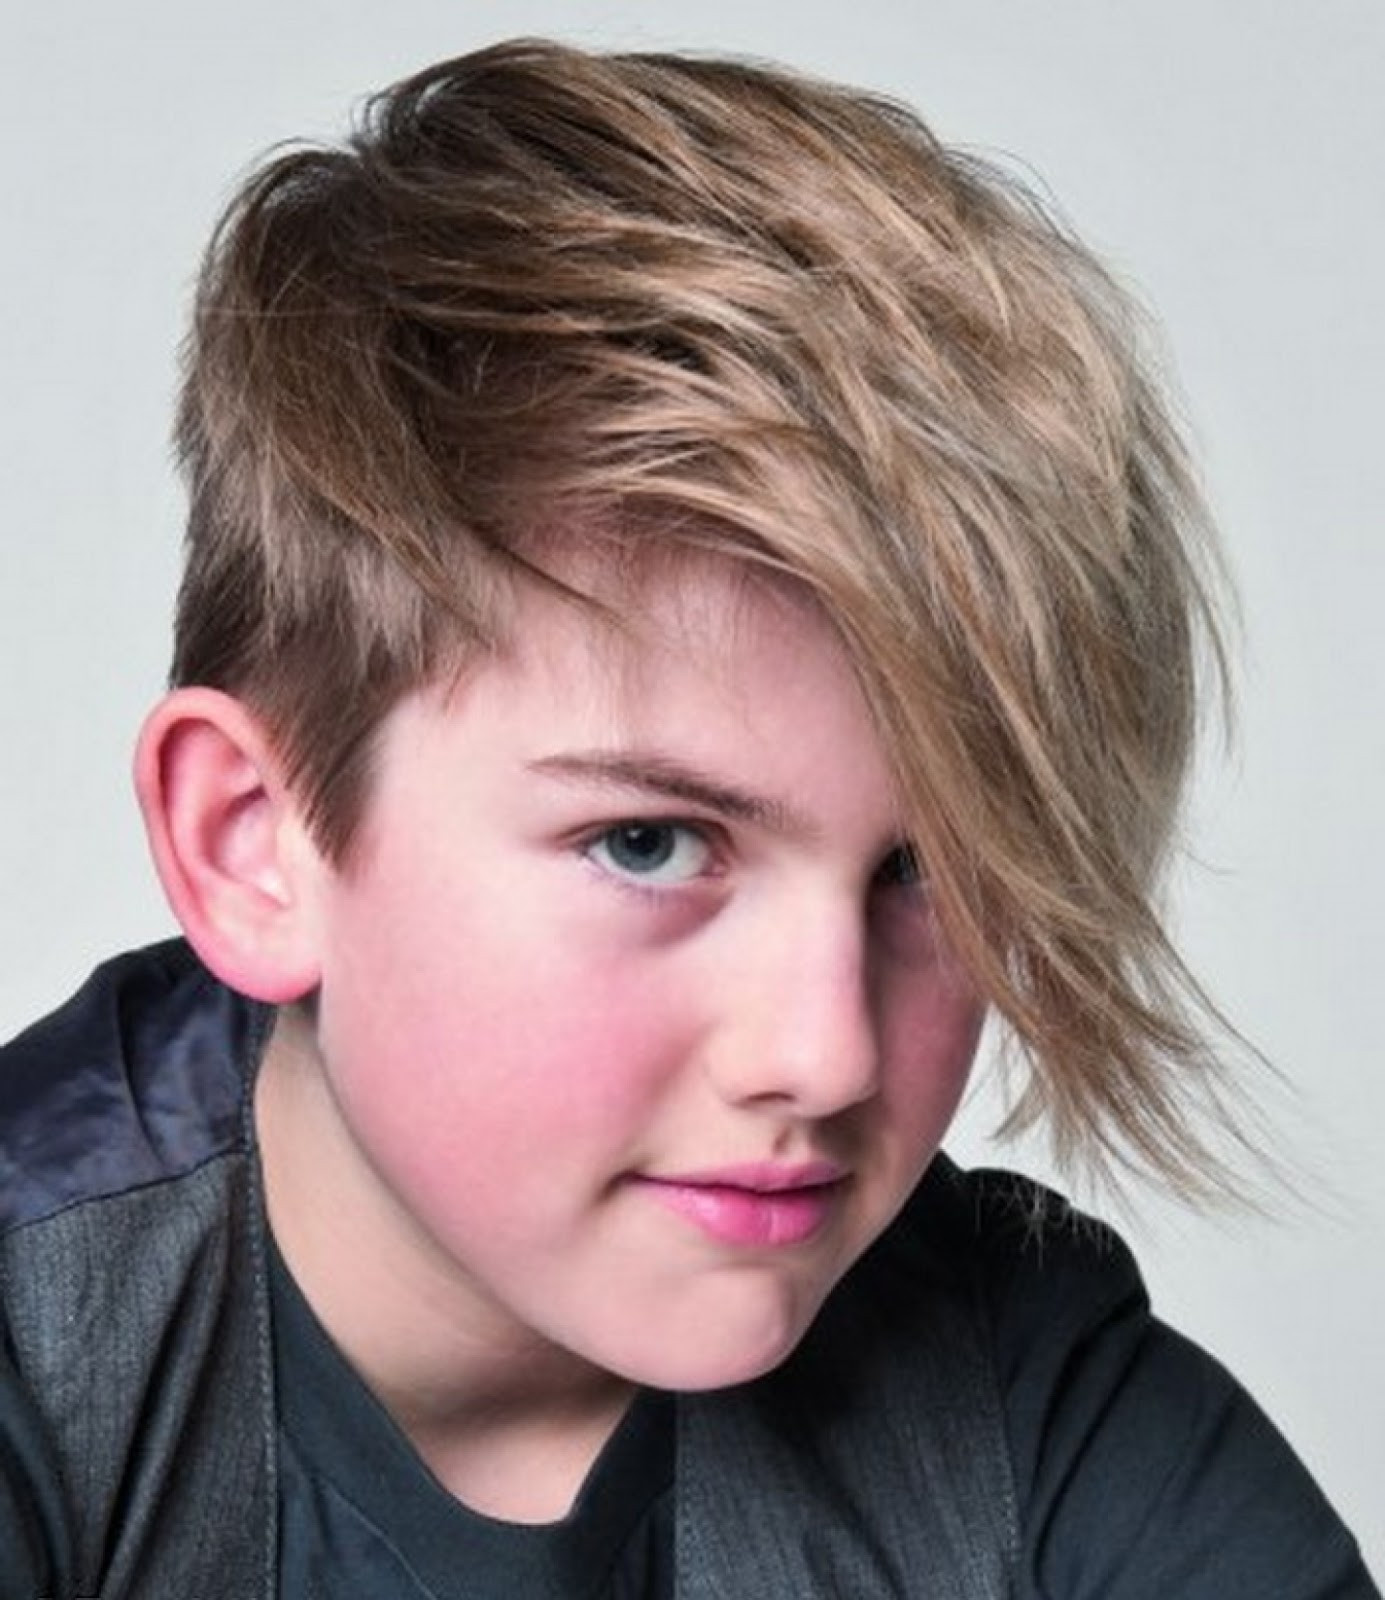 Boys Cool Haircuts
 Boys Haircuts 14 Cool Hairstyles for Boys with Short or